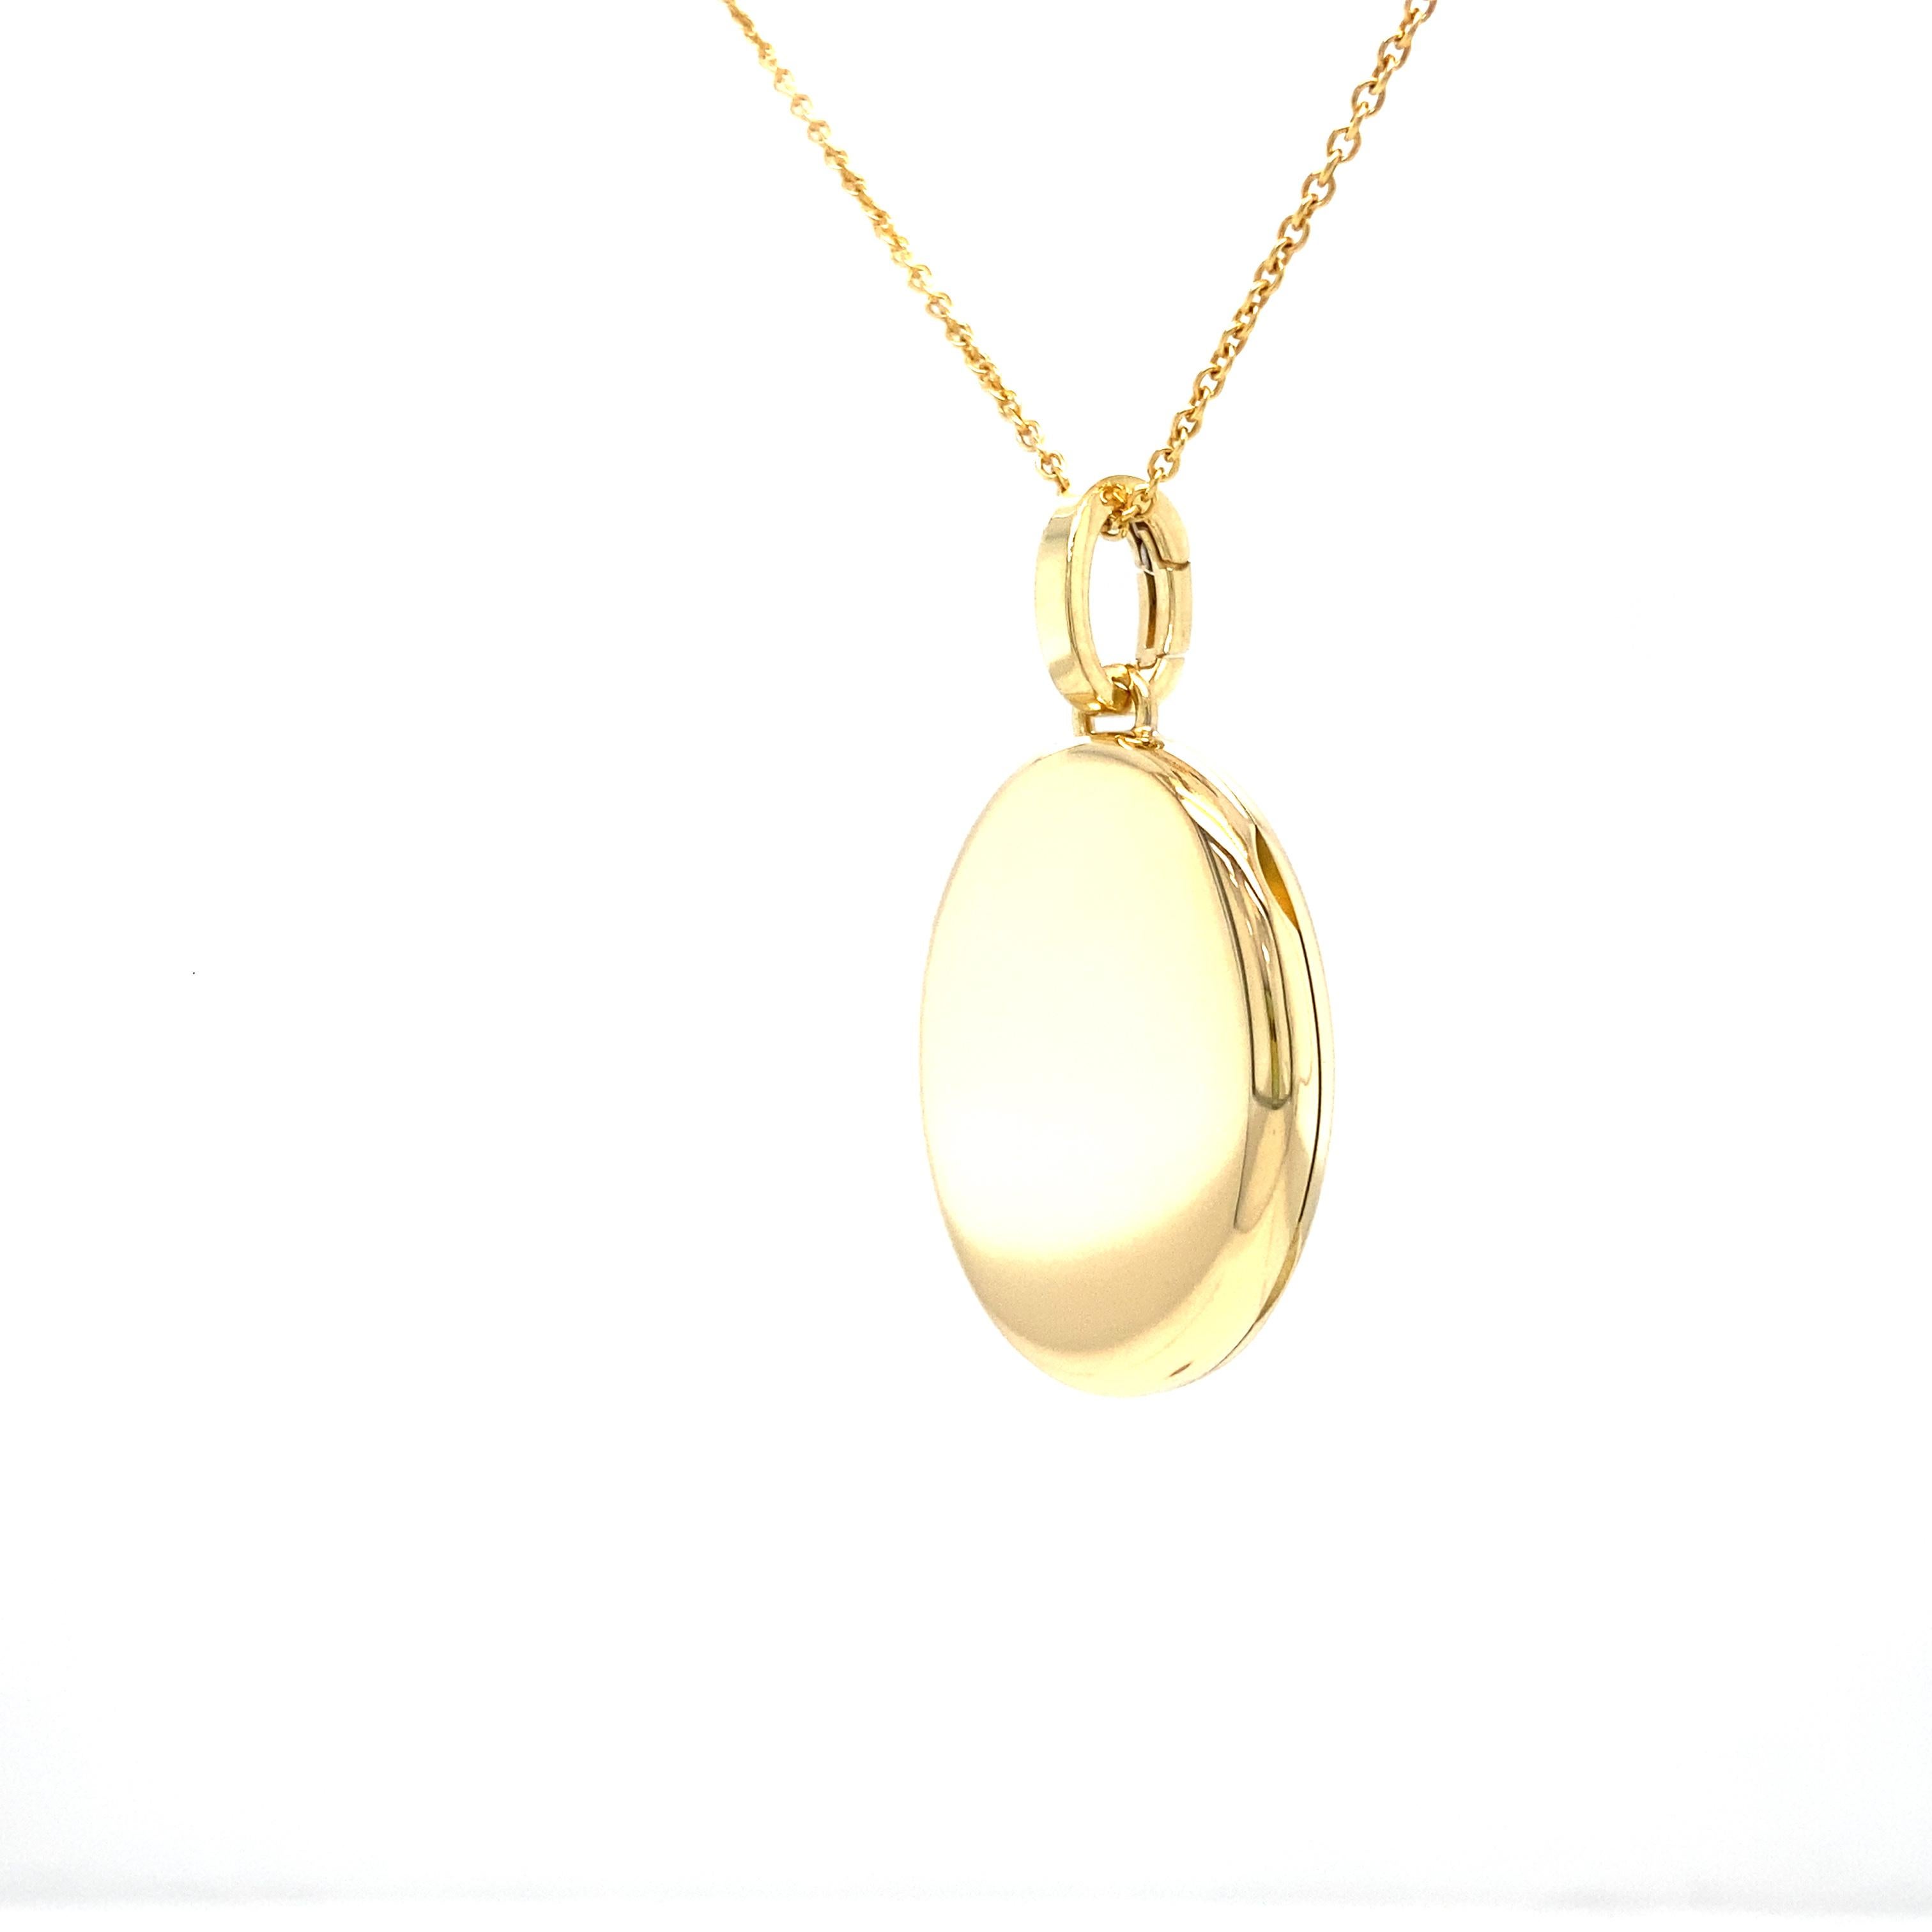 Victor Mayer customizable polished oval locket pendant 18k yellow gold, Hallmark collection, measurements app. 20.0 mm x app. 27.0 mm

About the creator Victor Mayer
Victor Mayer is internationally renowned for elegant timeless designs and